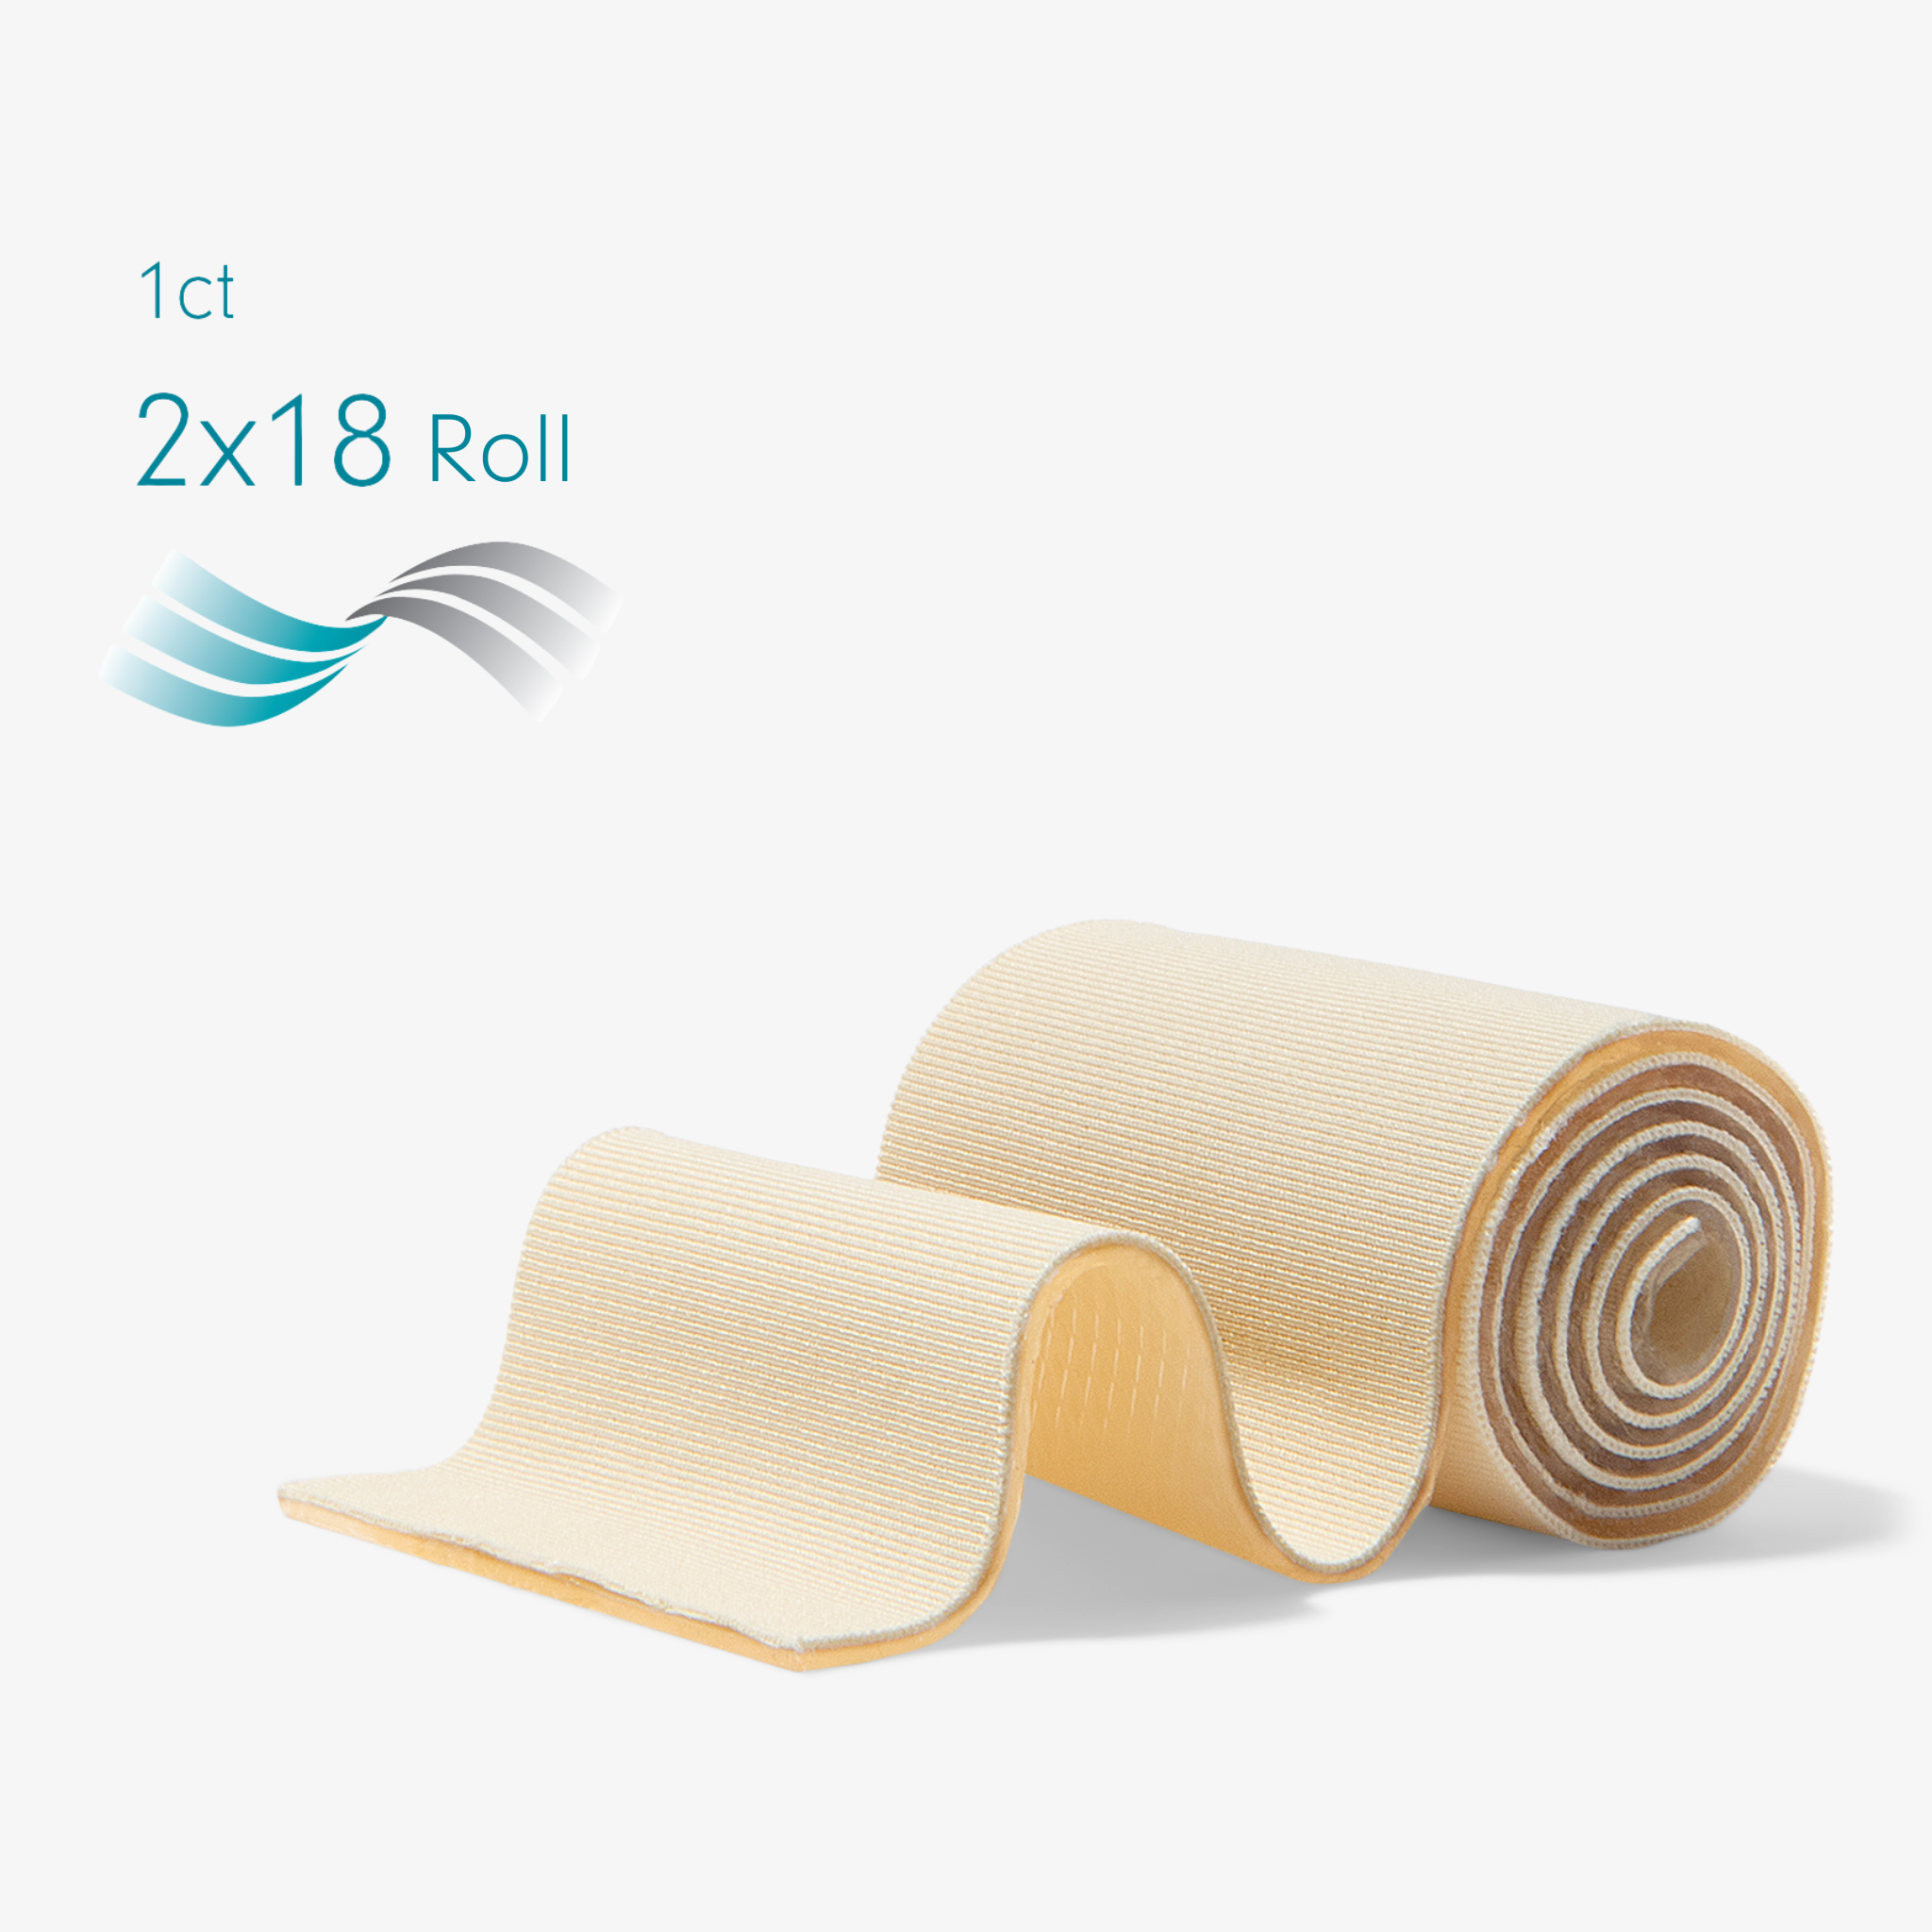 Advanced Medical-Grade Silicone 2" x 18" Roll 1 count | beige